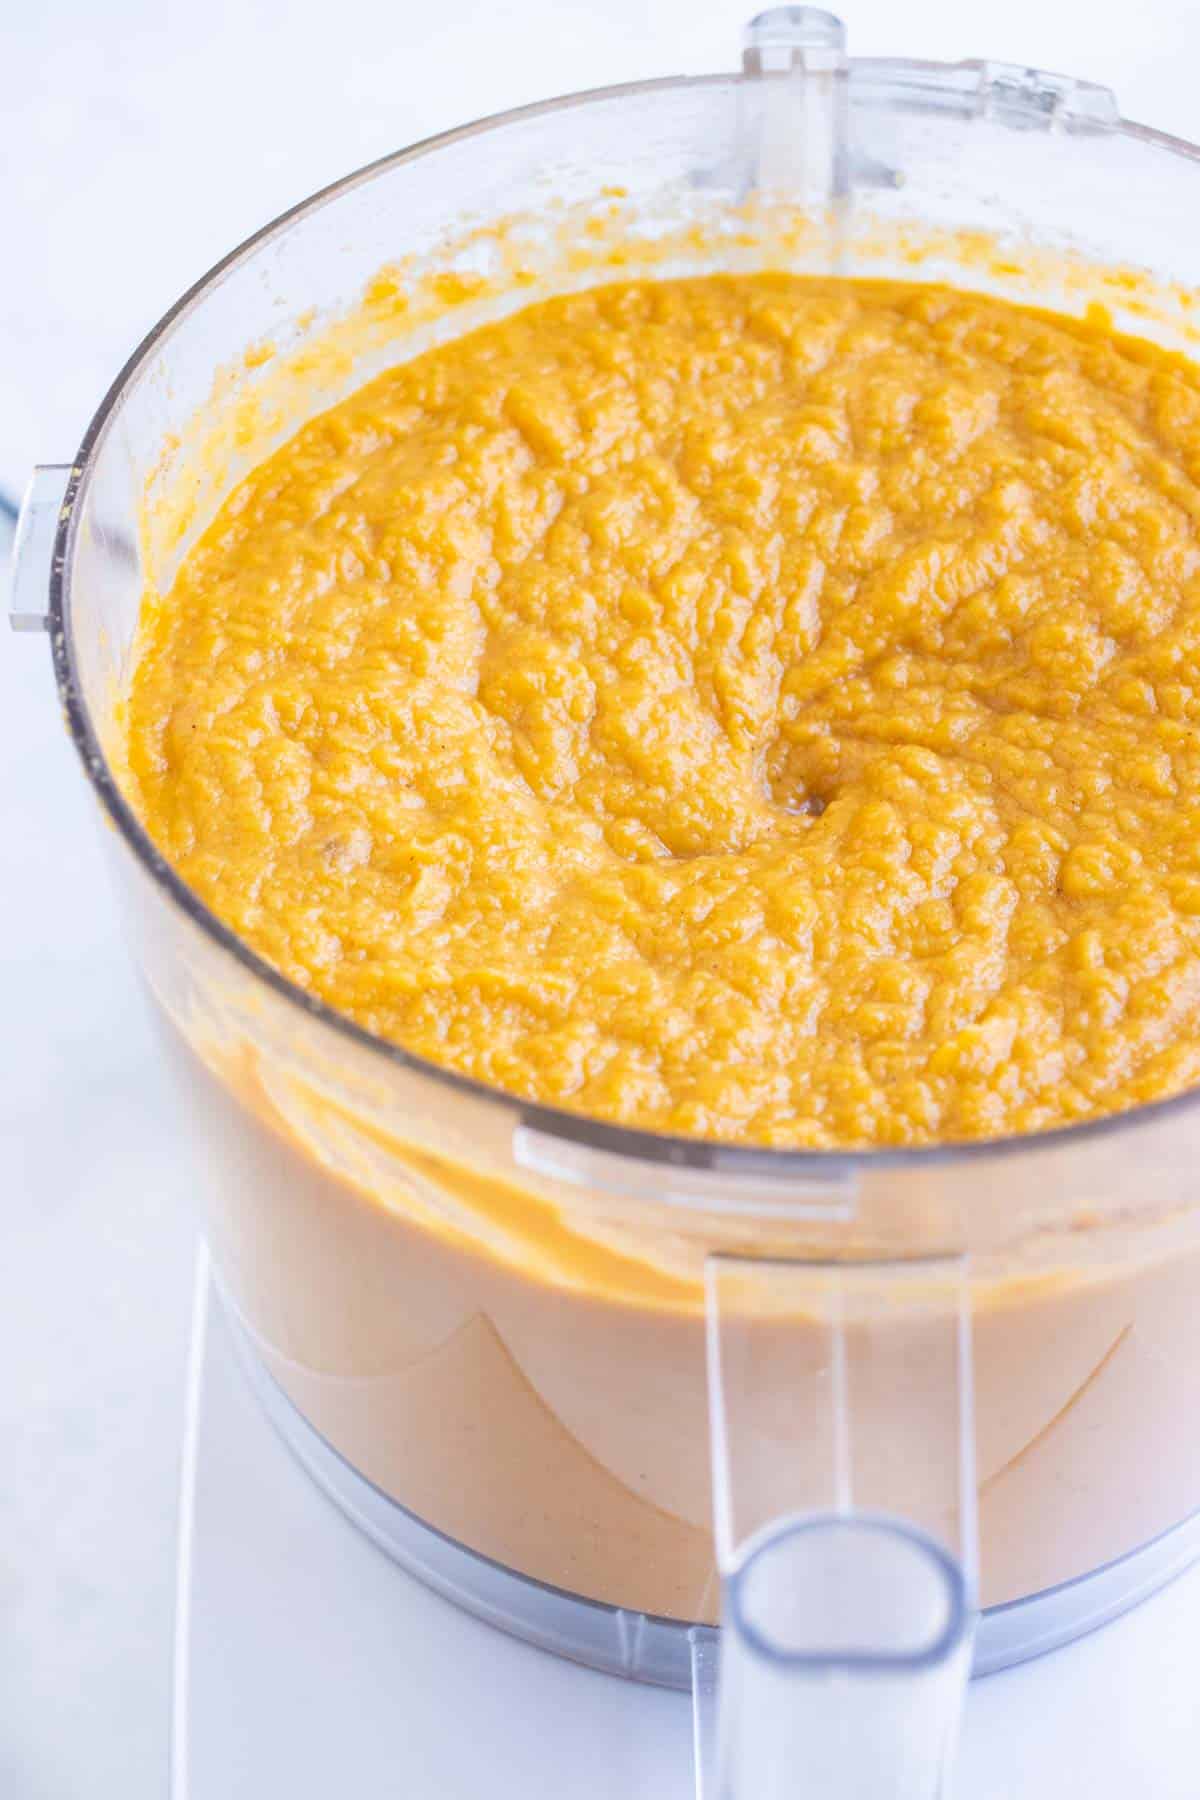 Sweet potato puree is blended in a food processor.